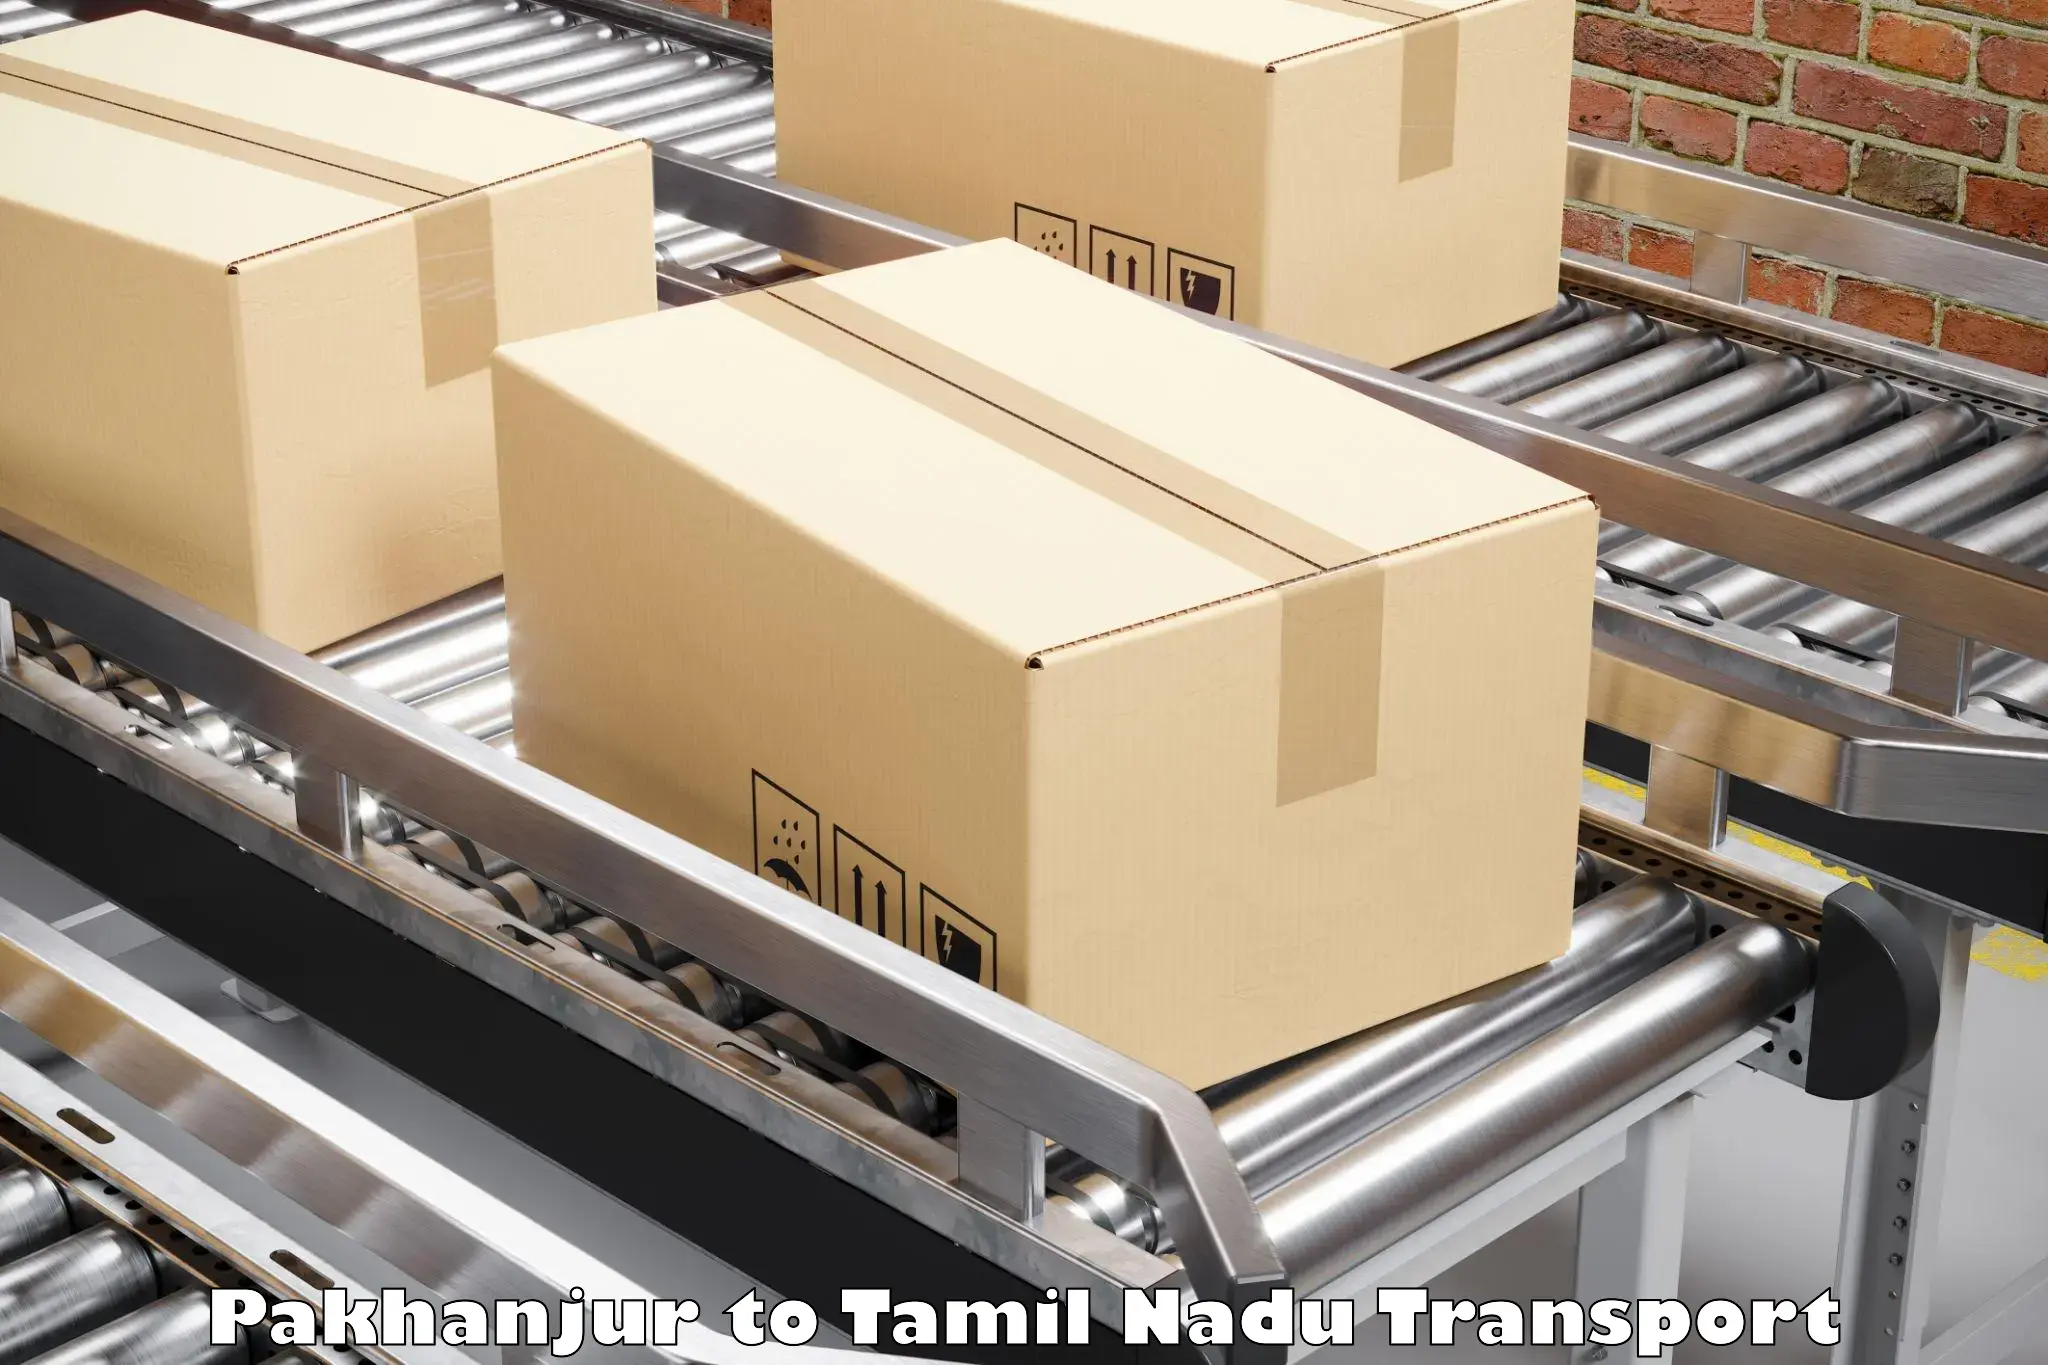 Cargo train transport services in Pakhanjur to Chennai Port